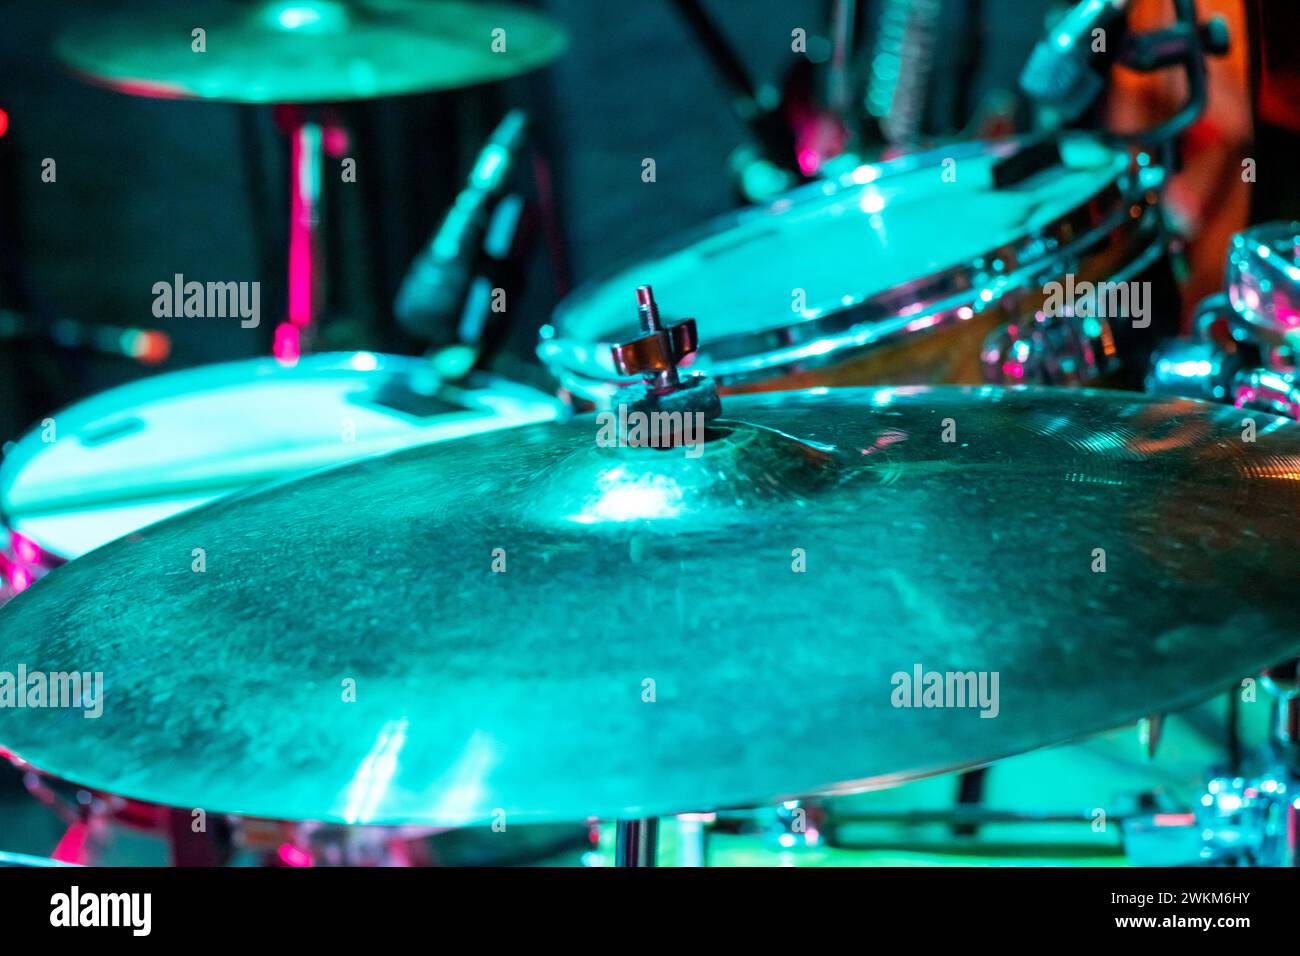 Drum kit in green light close up top wiew Stock Photo